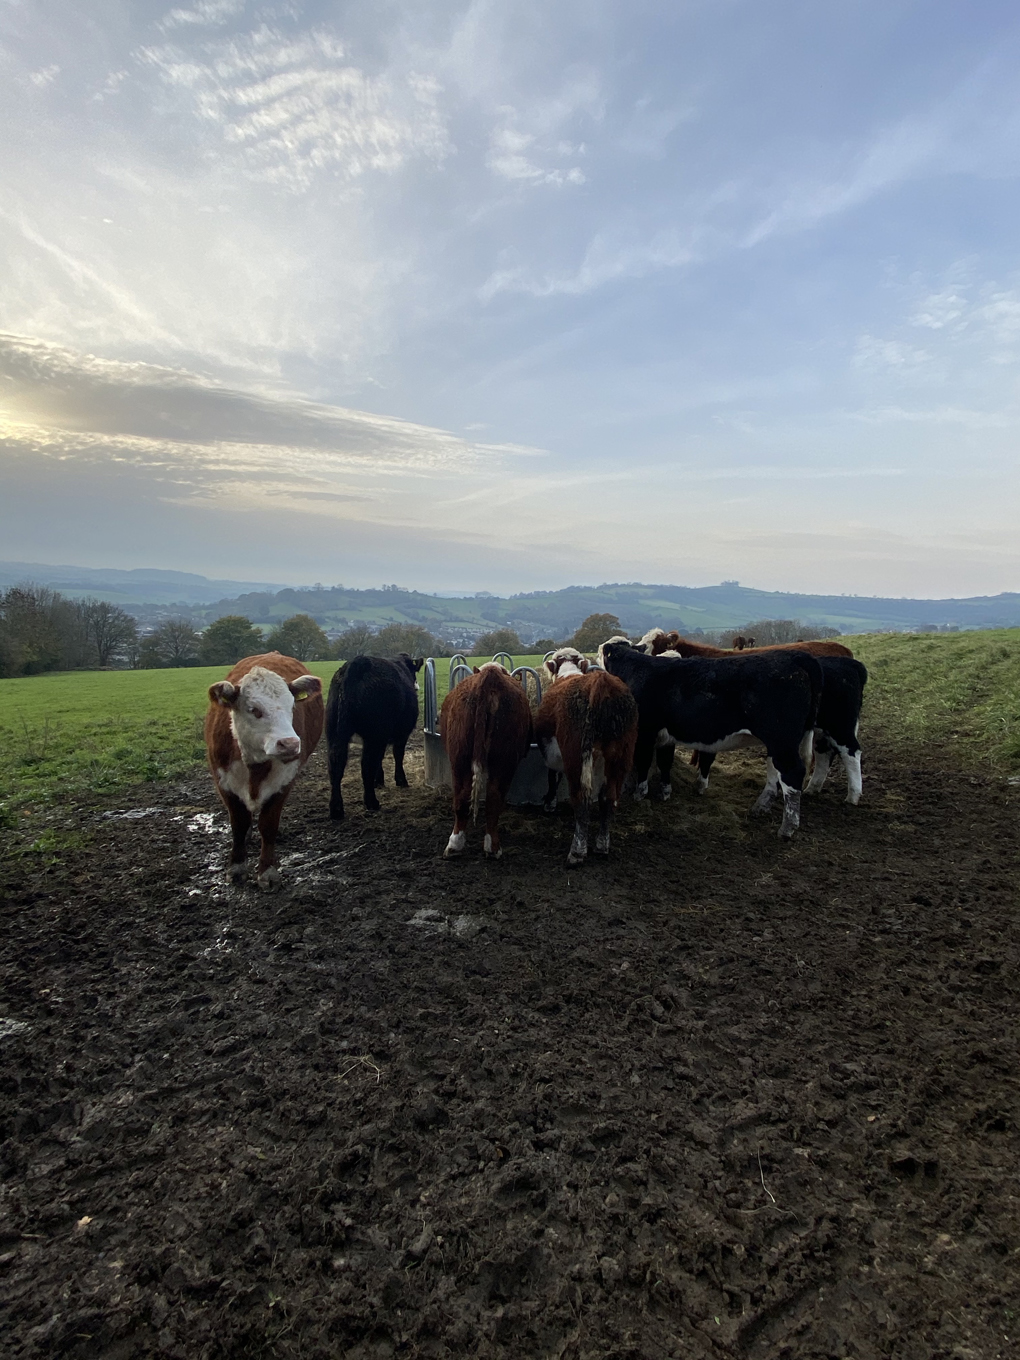 Cows clustered around a feeding station, with views of hills in the background